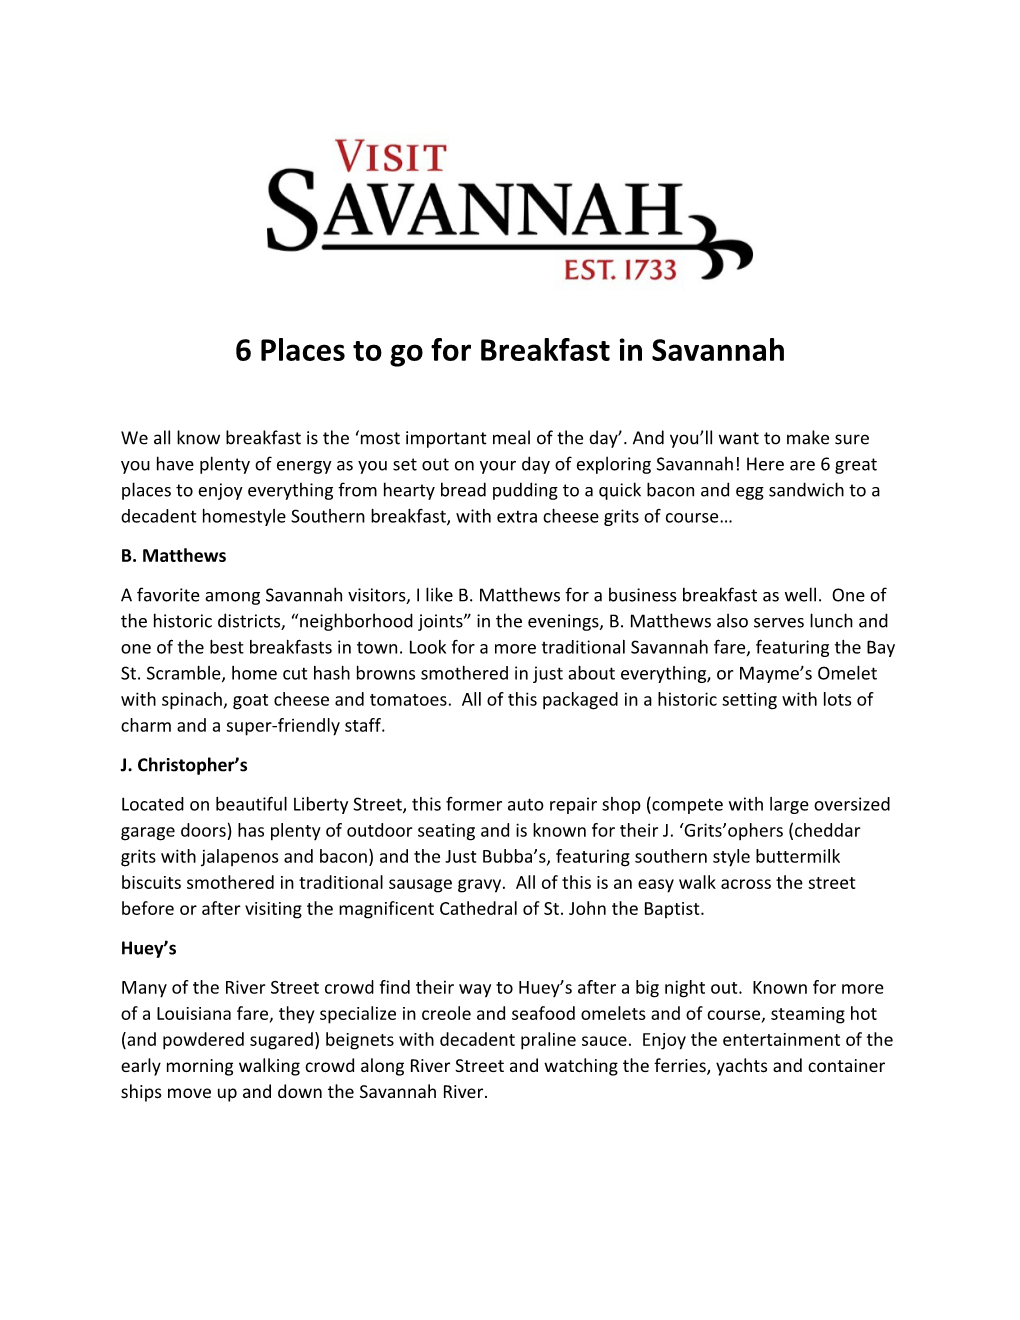 6 Places to Go for Breakfast in Savannah